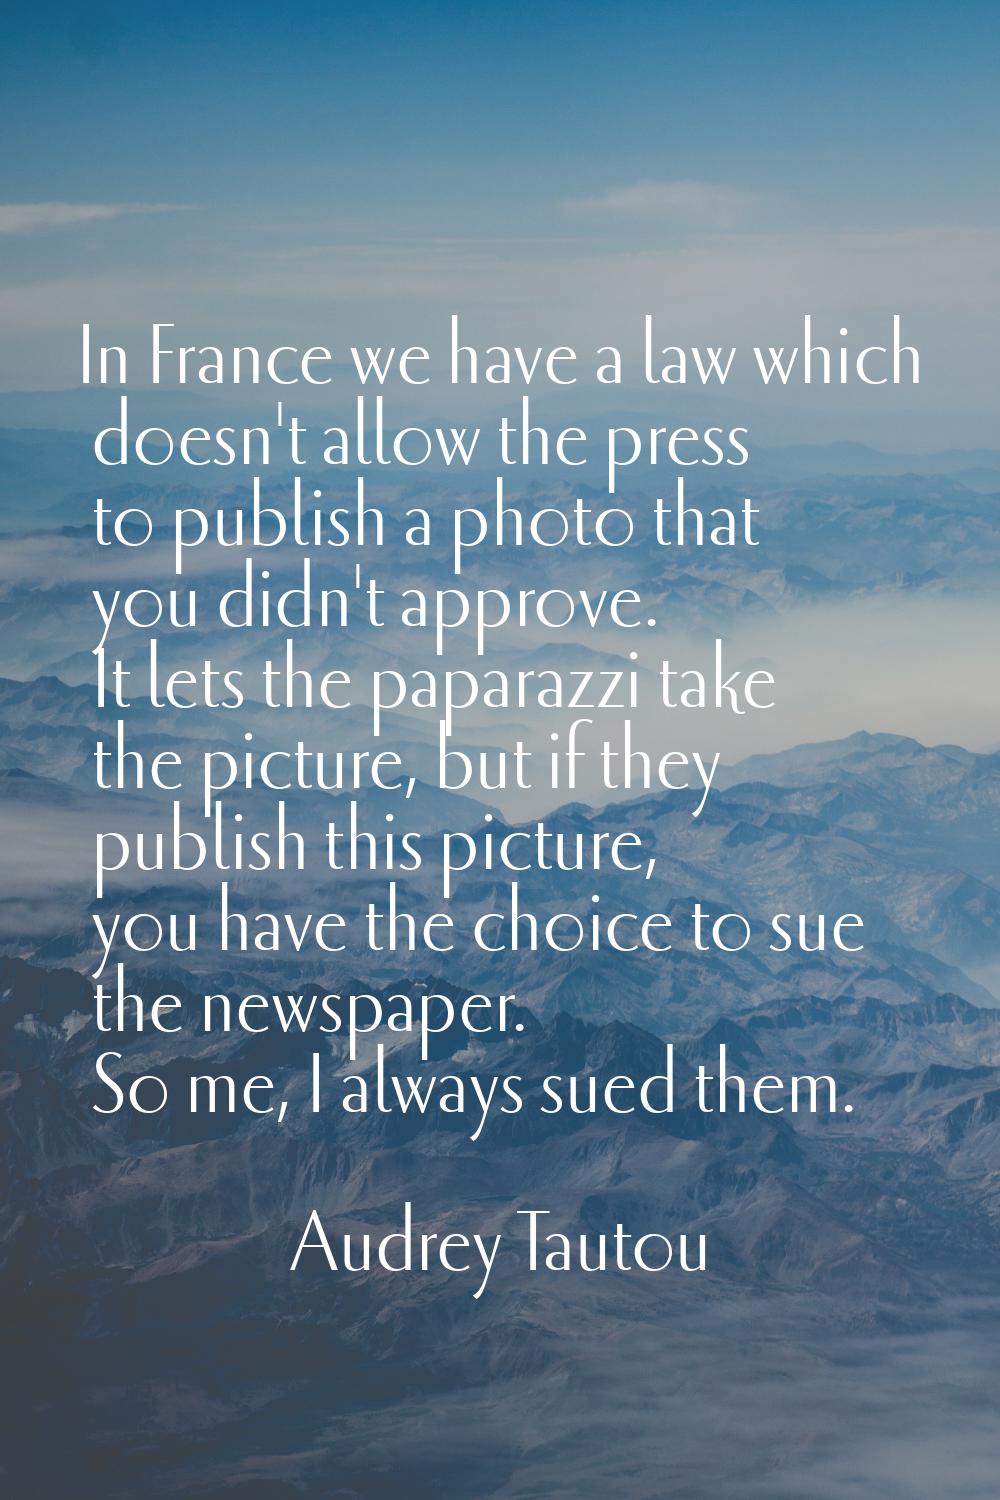 In France we have a law which doesn't allow the press to publish a photo that you didn't approve. I